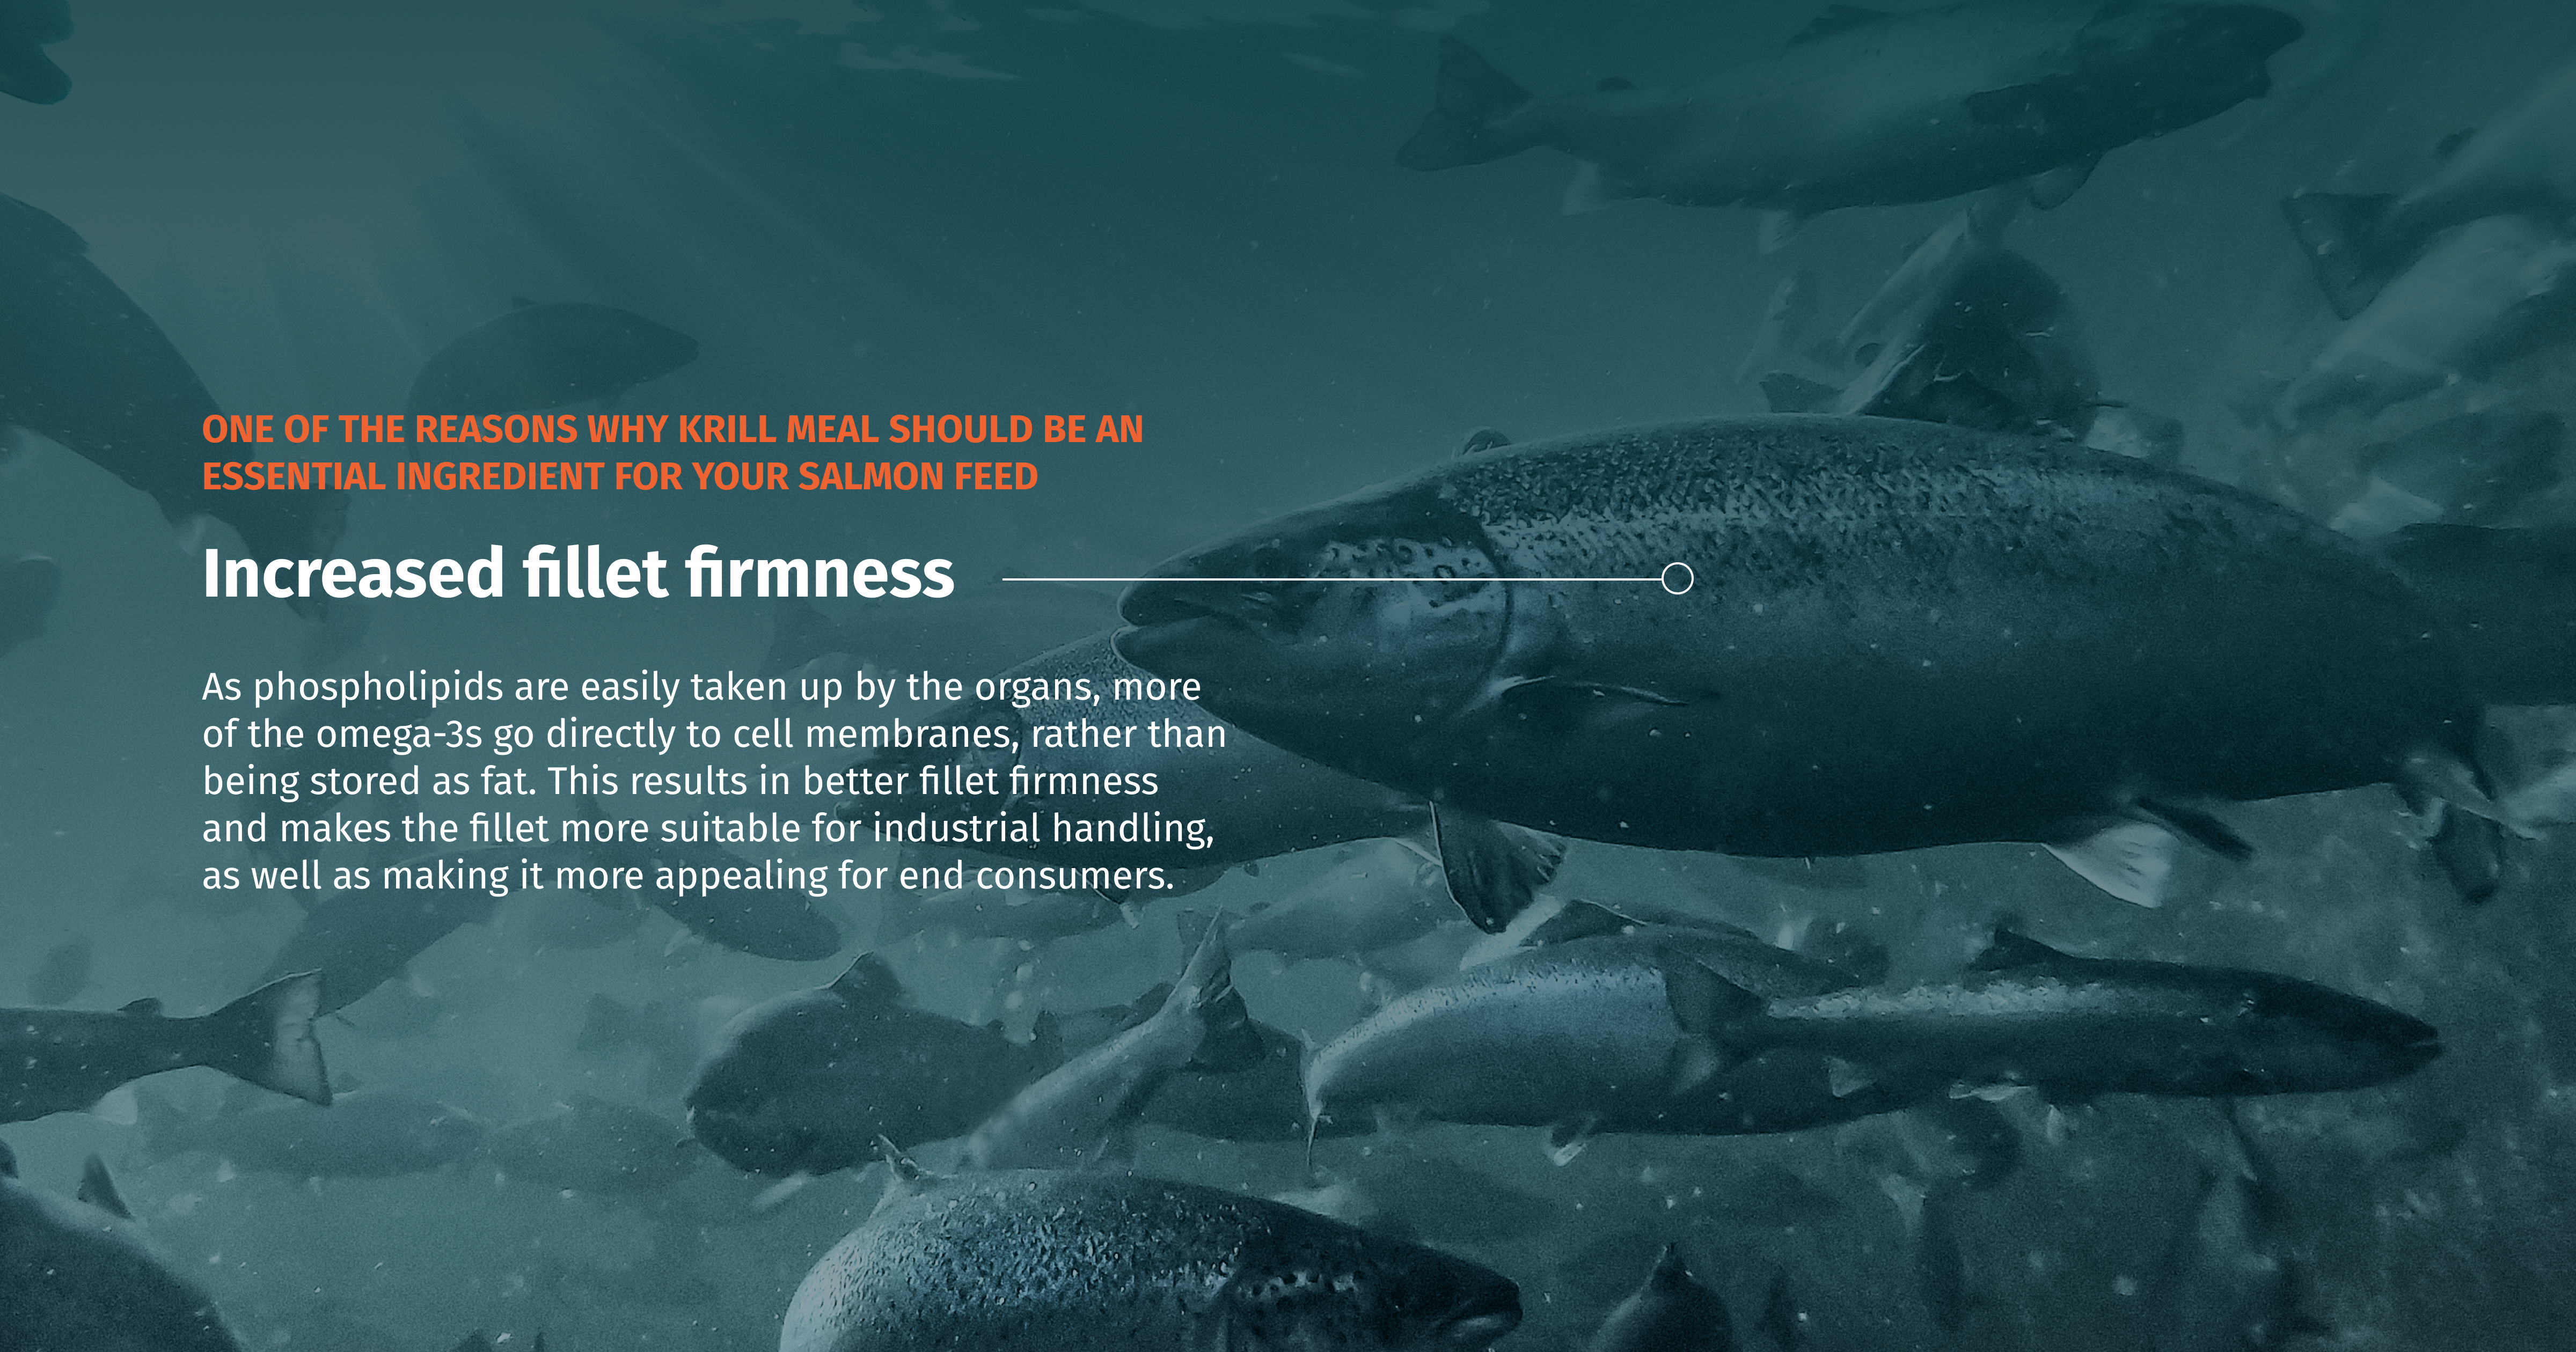 QRILL Aqua_Blog_10 reasons krill for your salmon feed_Image2